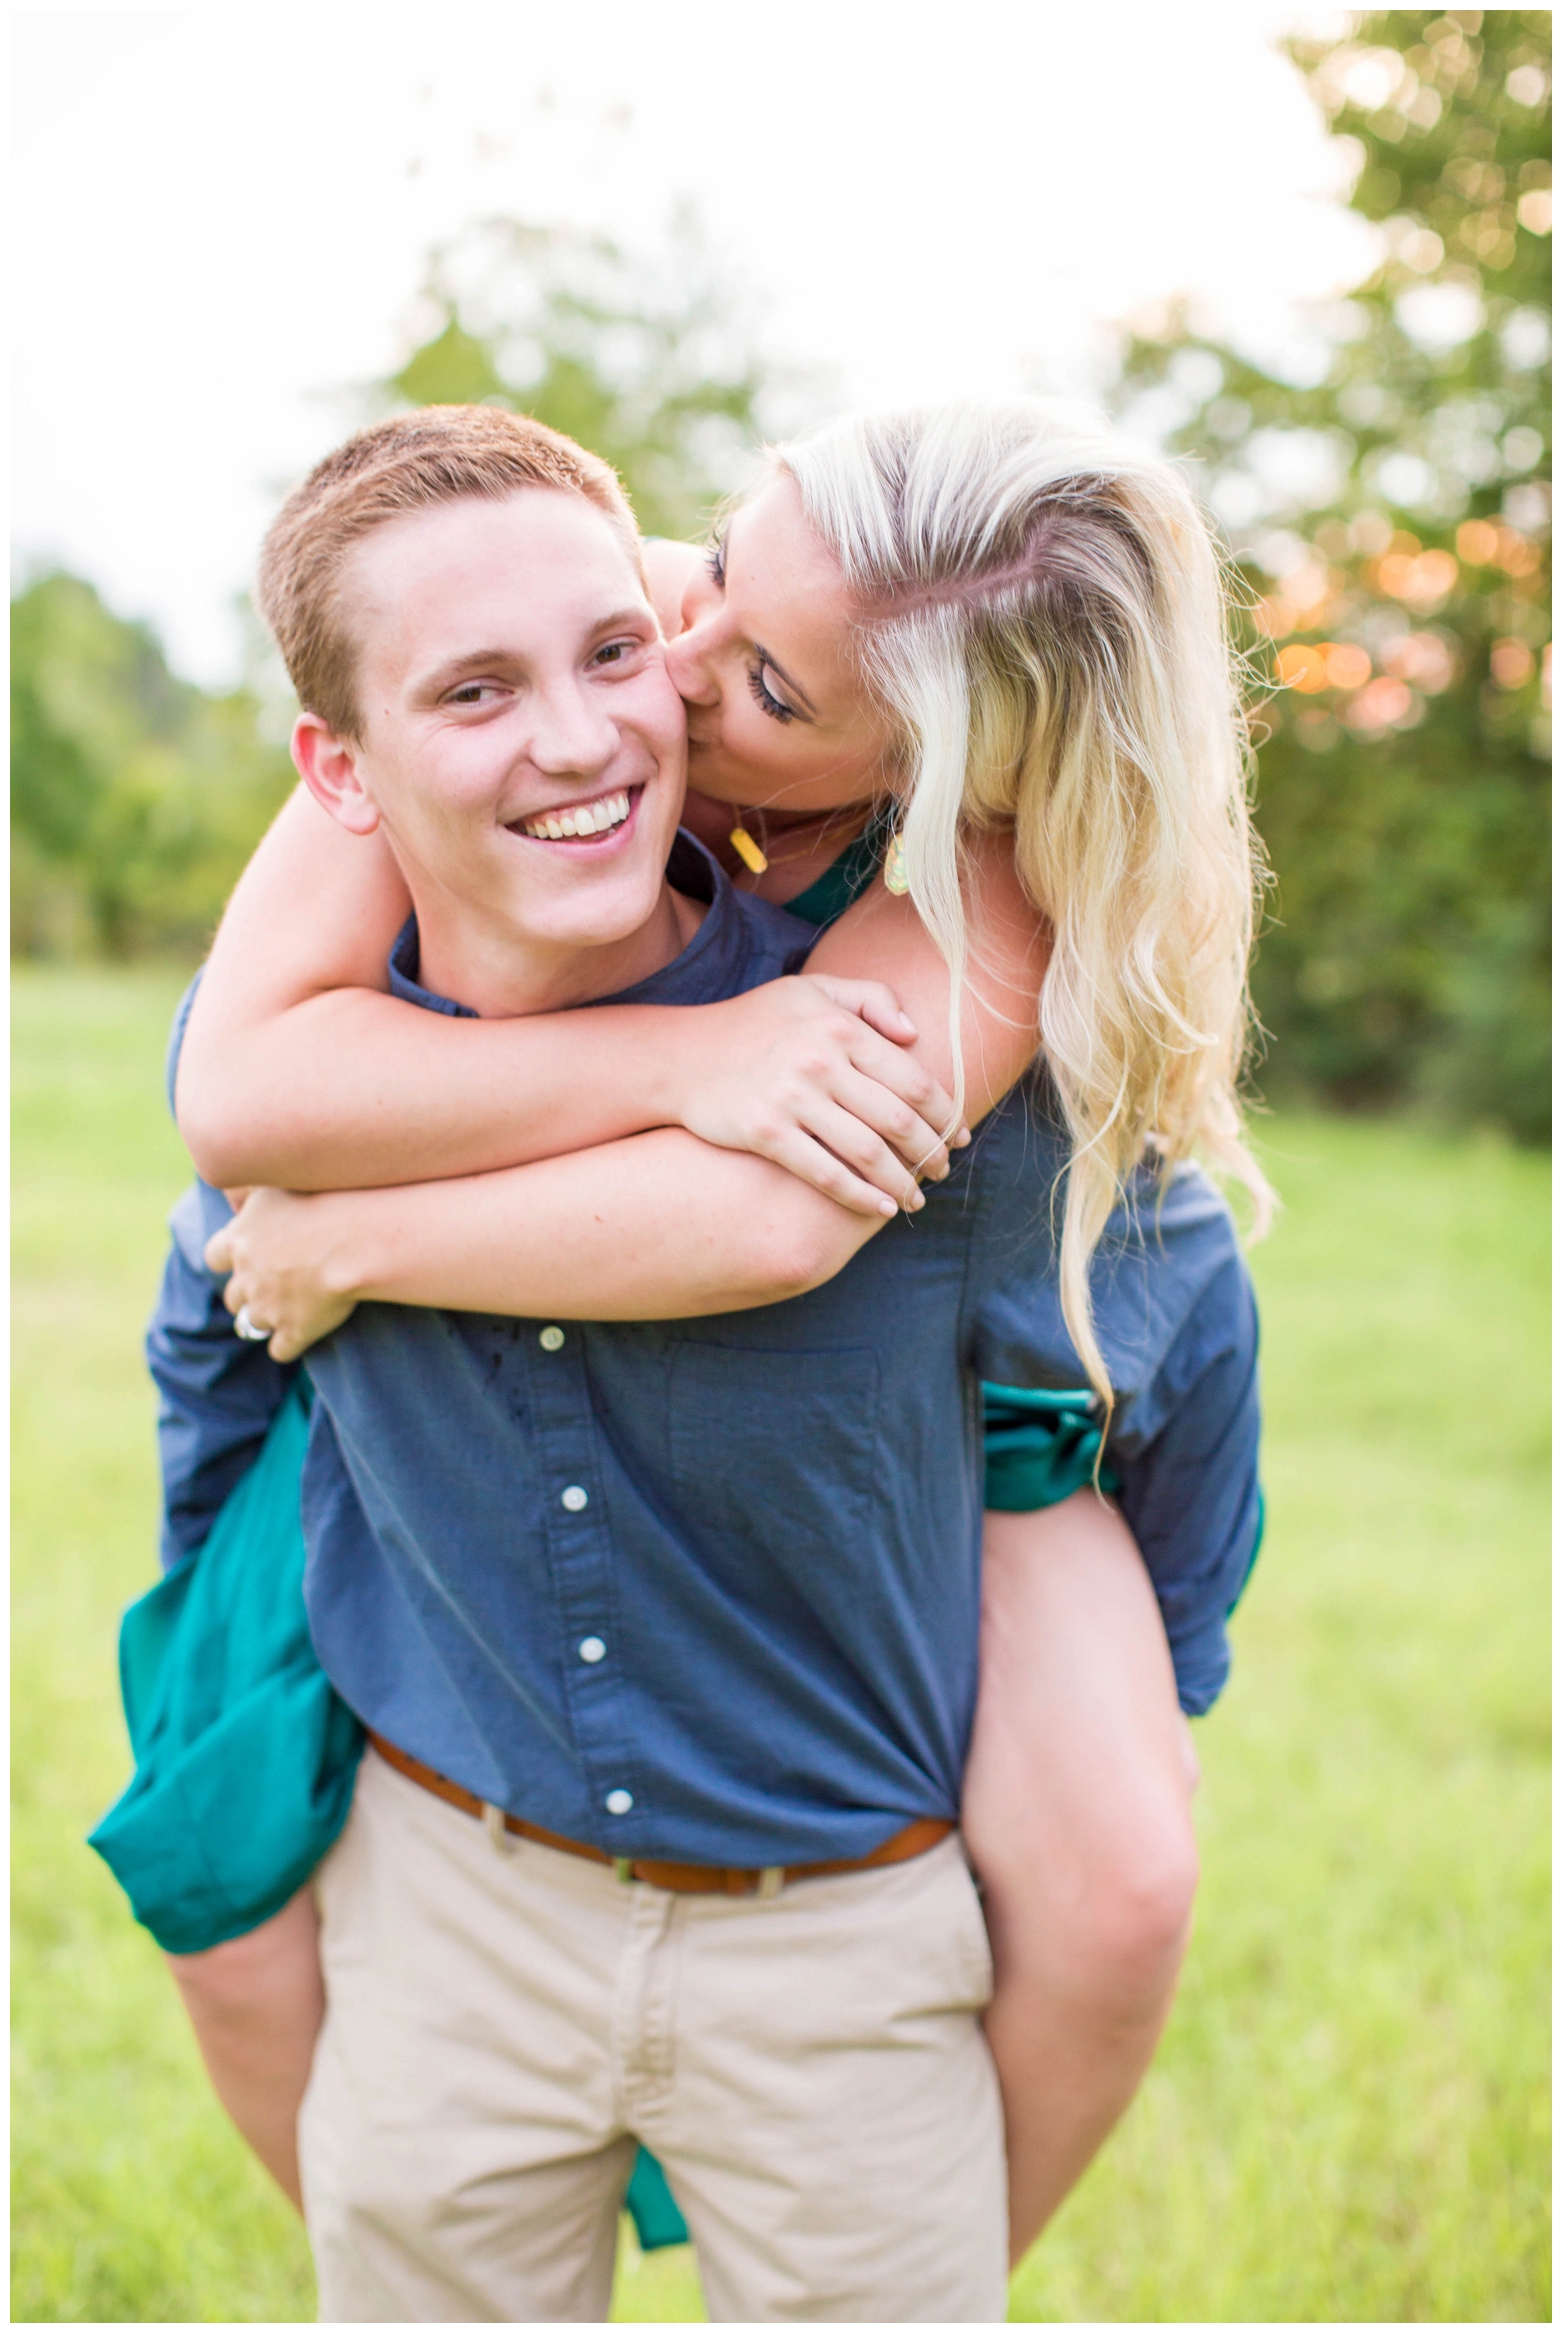 View More: http://hopetaylorphotographyphotos.pass.us/katie-and-ryan-engagement